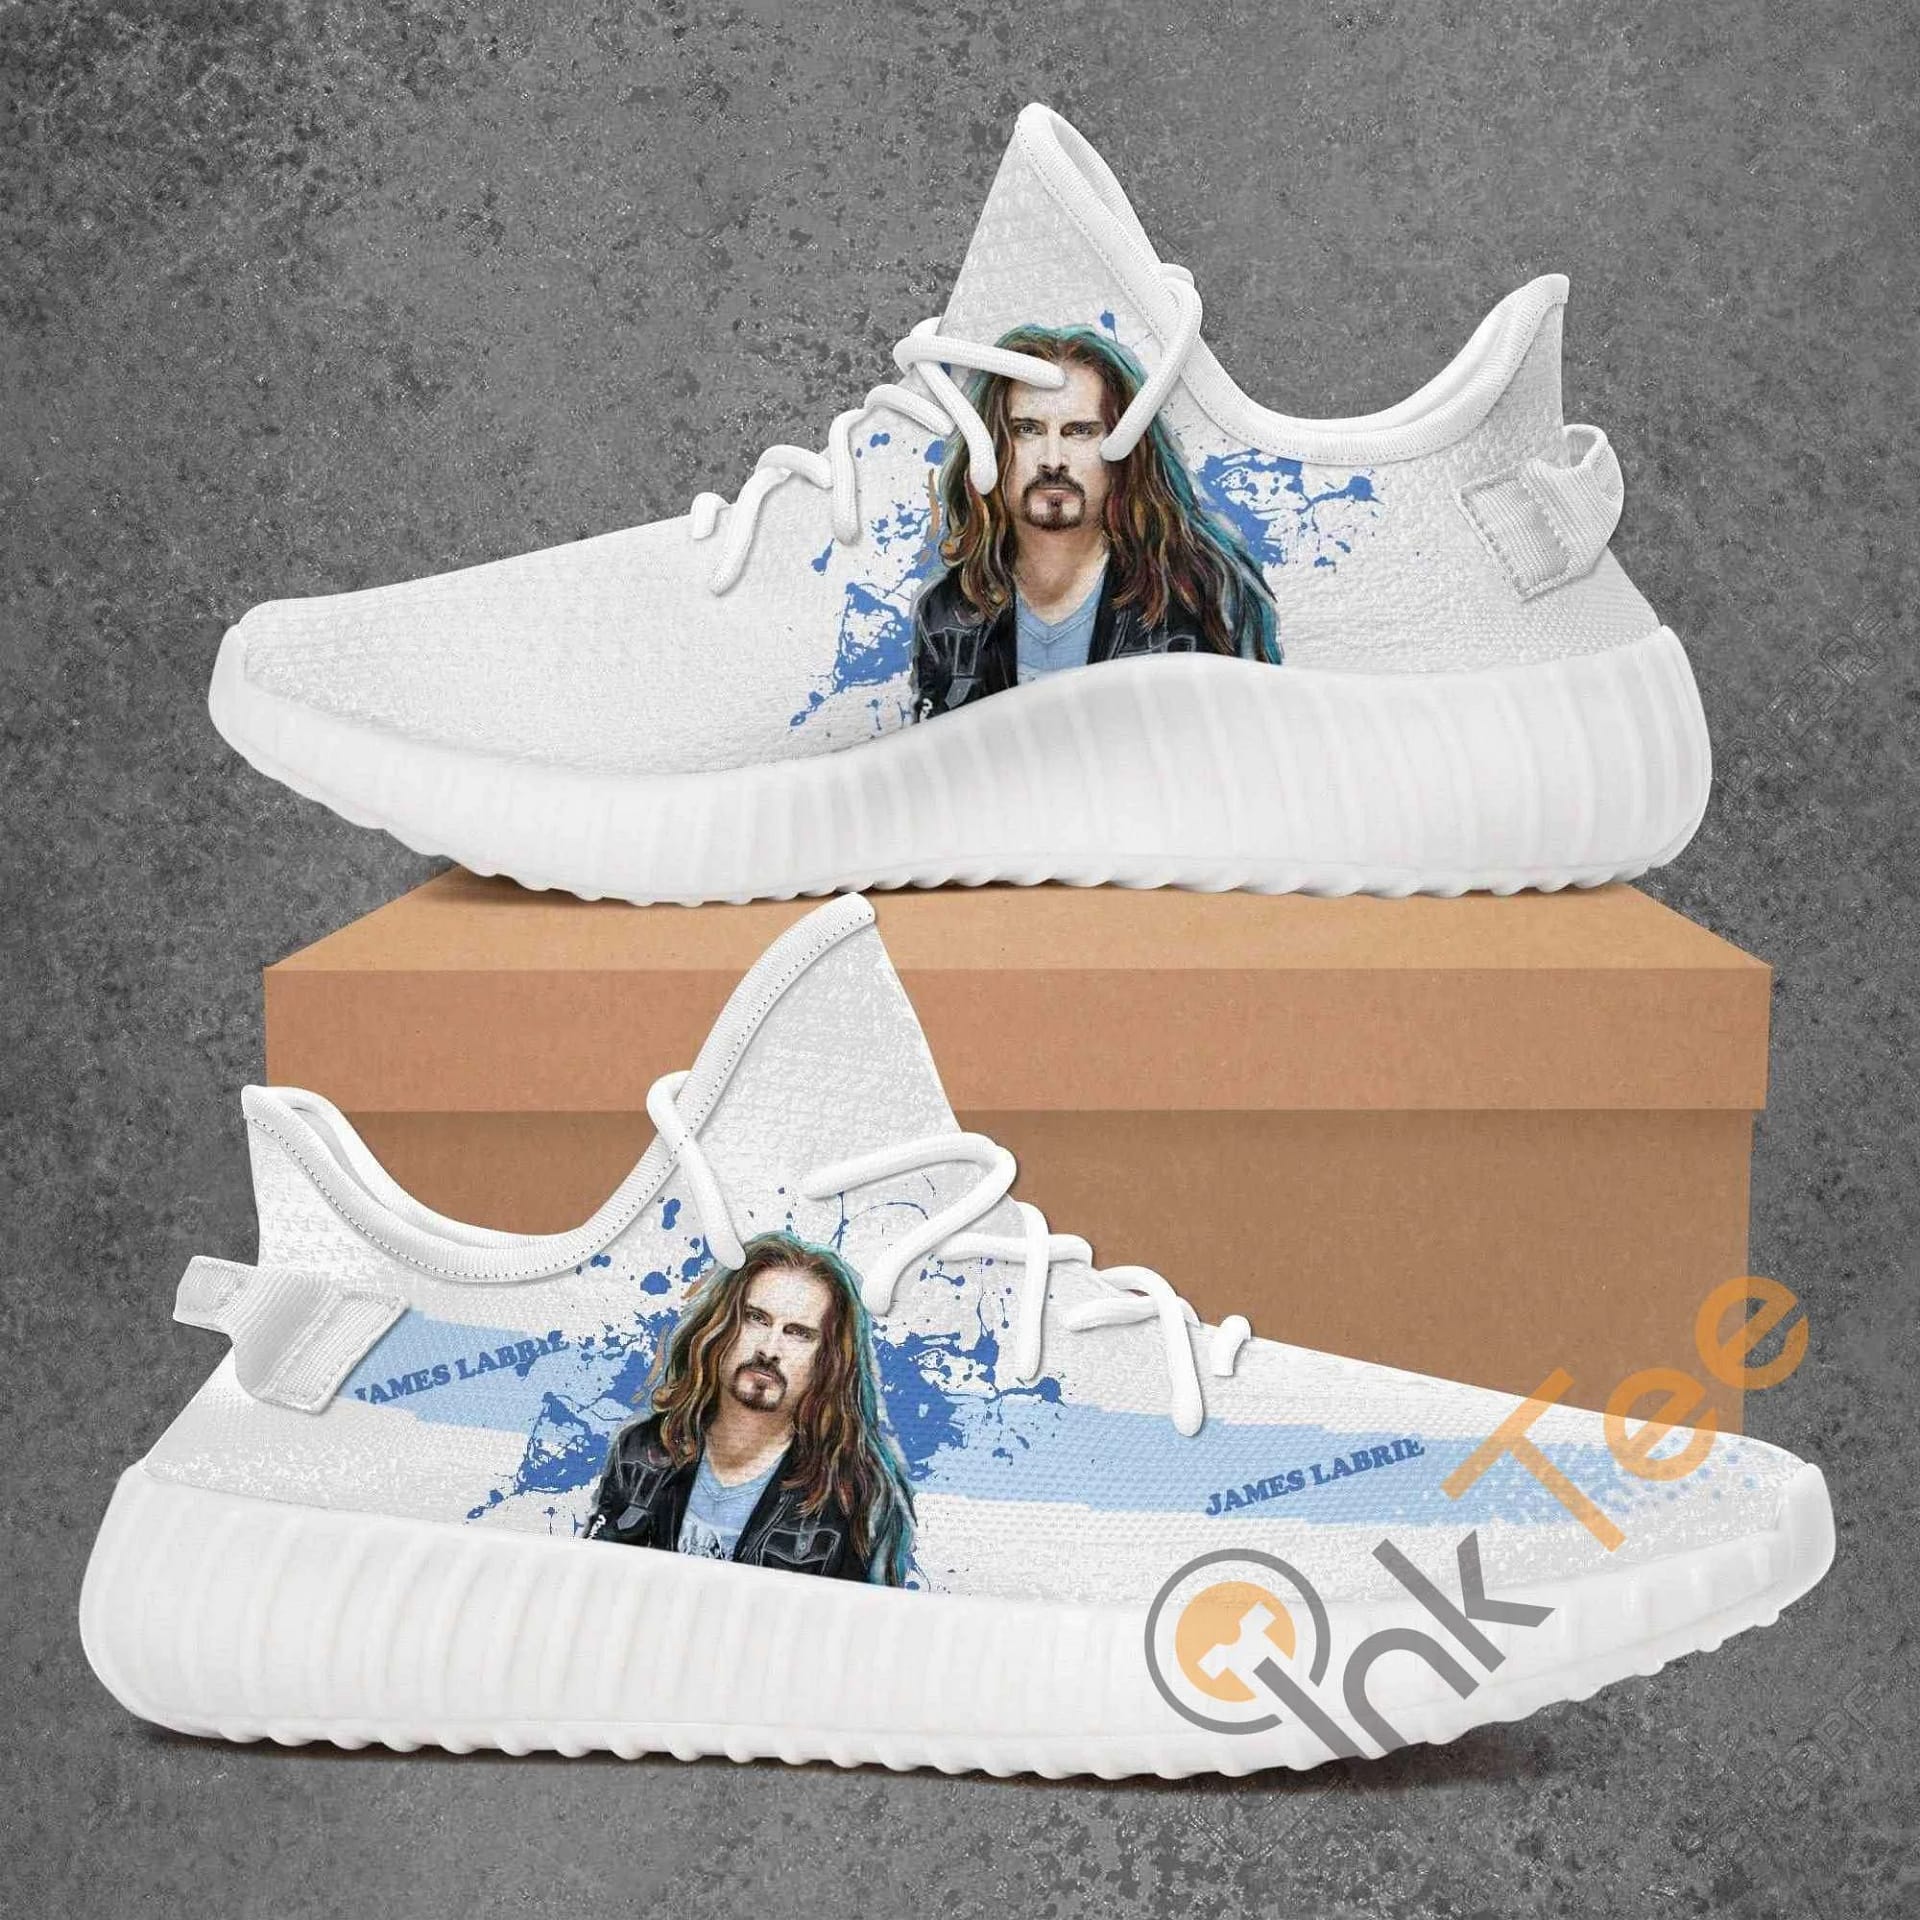 James Labrie Amazon Best Selling Yeezy Boost